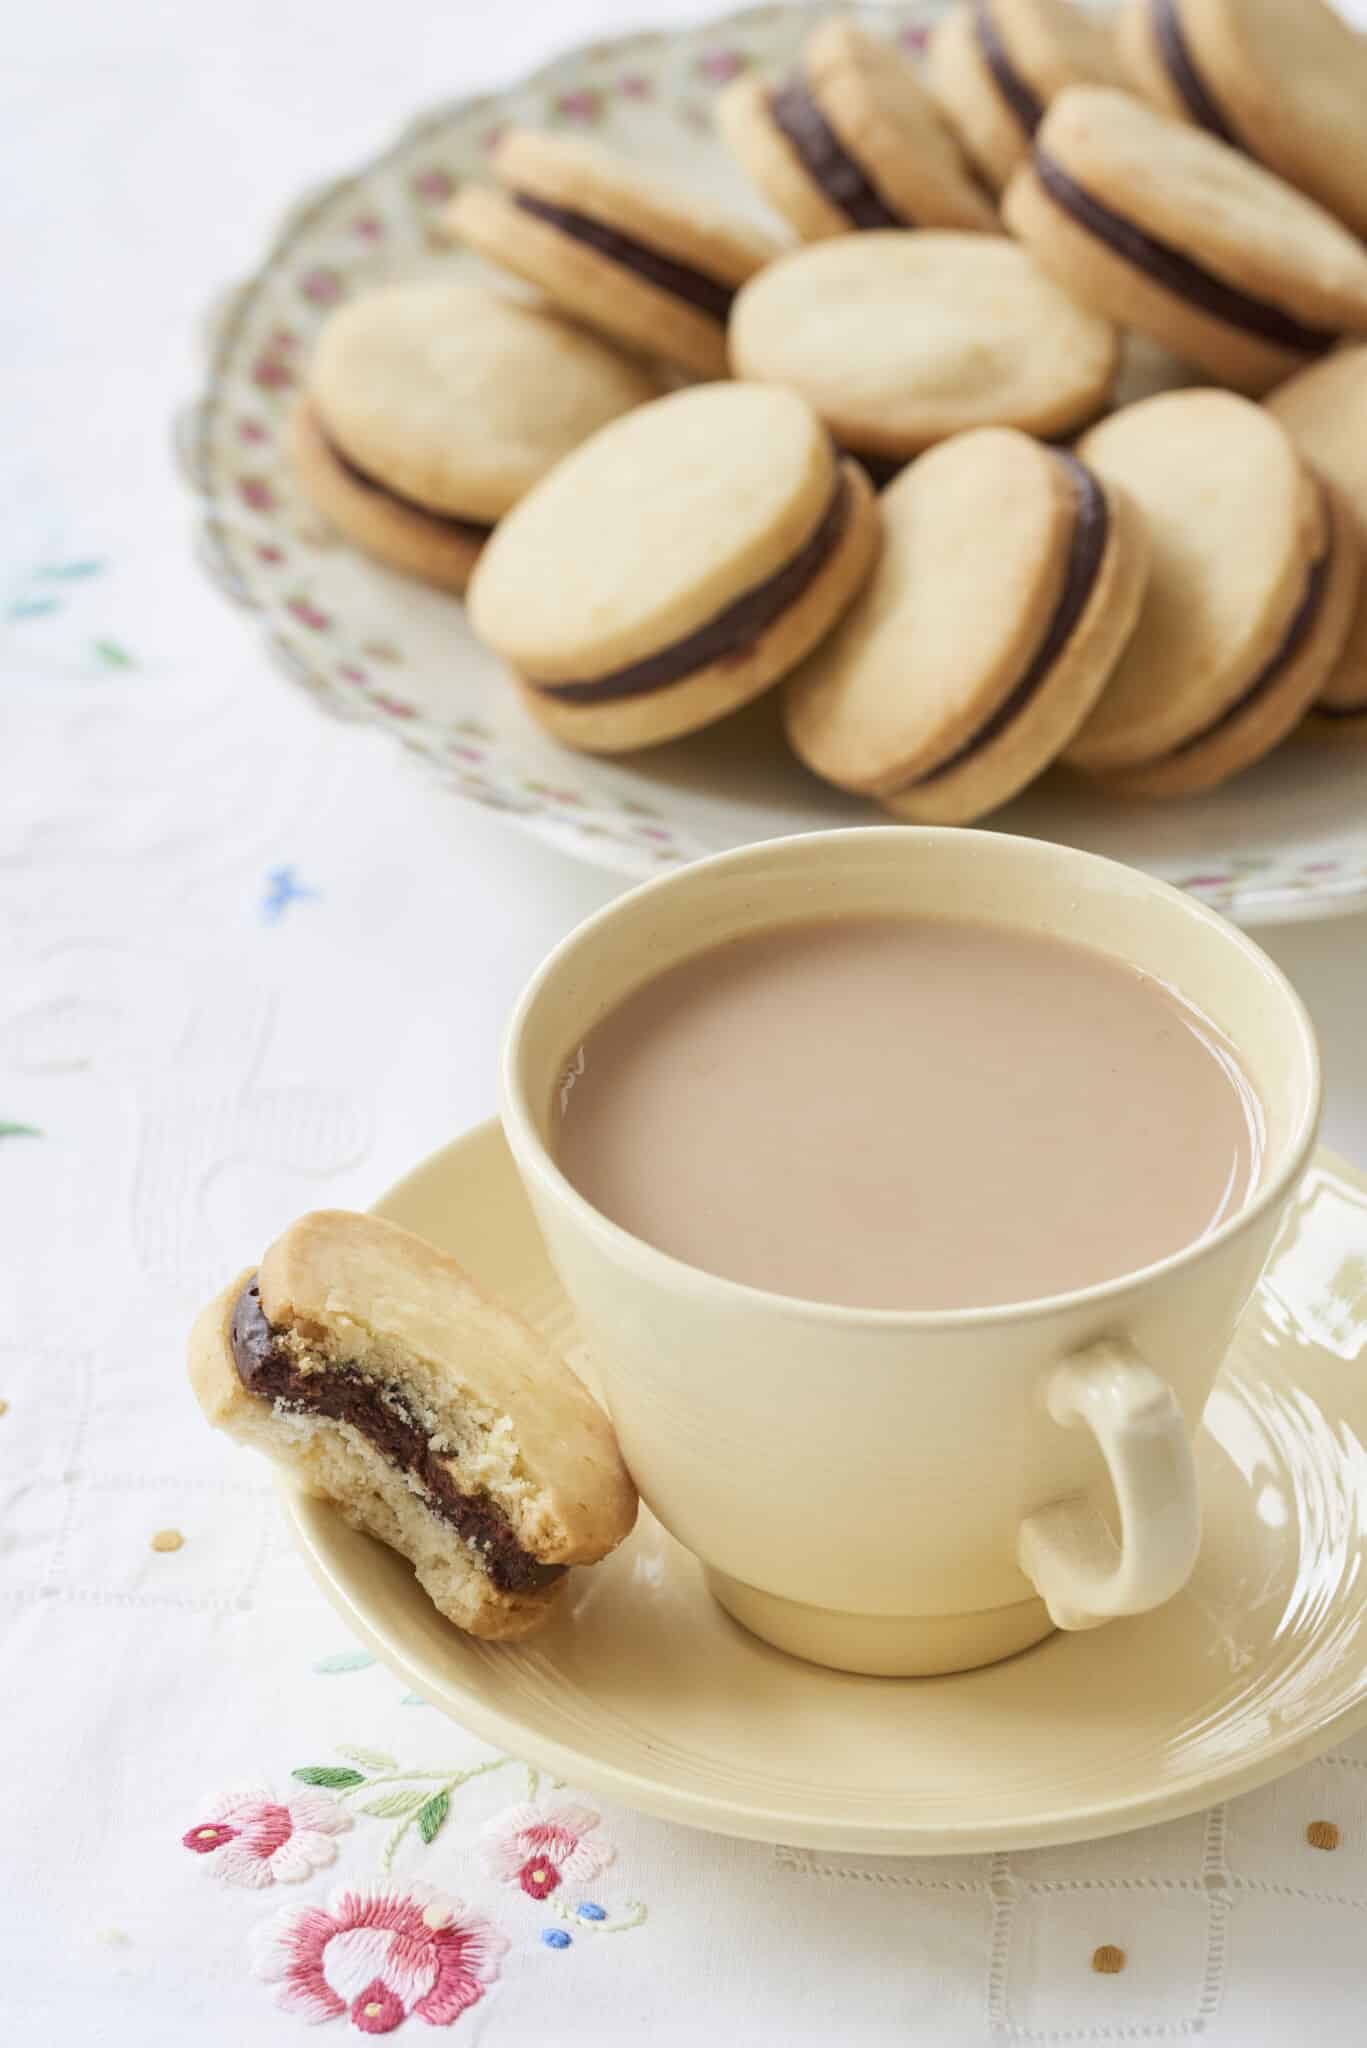 Sandwich cookies Orange Shortbread with Chocolate Orange Truffle Filling are perfectly round. One shortbread which has had one bite taken is served with a cup of tea on the saucer. The rest of the shortbread are in a large floral platter on the side. 